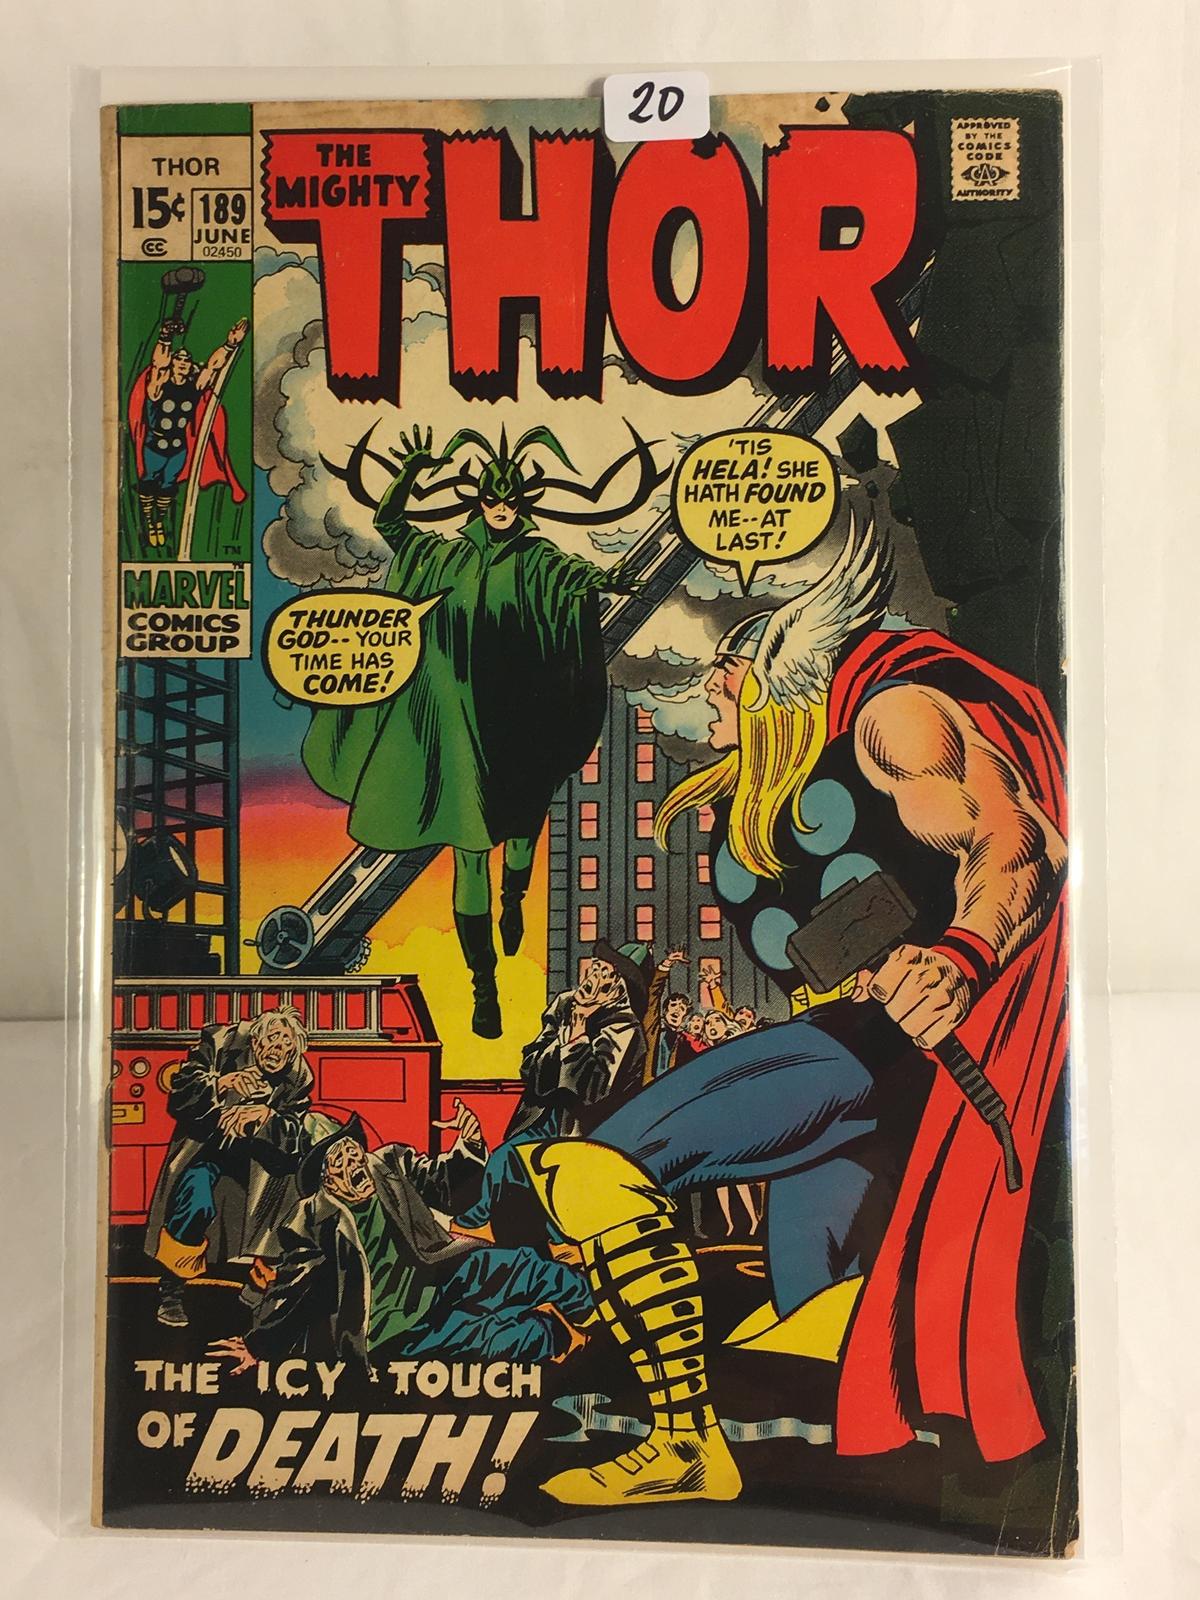 Vintage Marvel Comics Group The Mighty Thor Comic No. 189